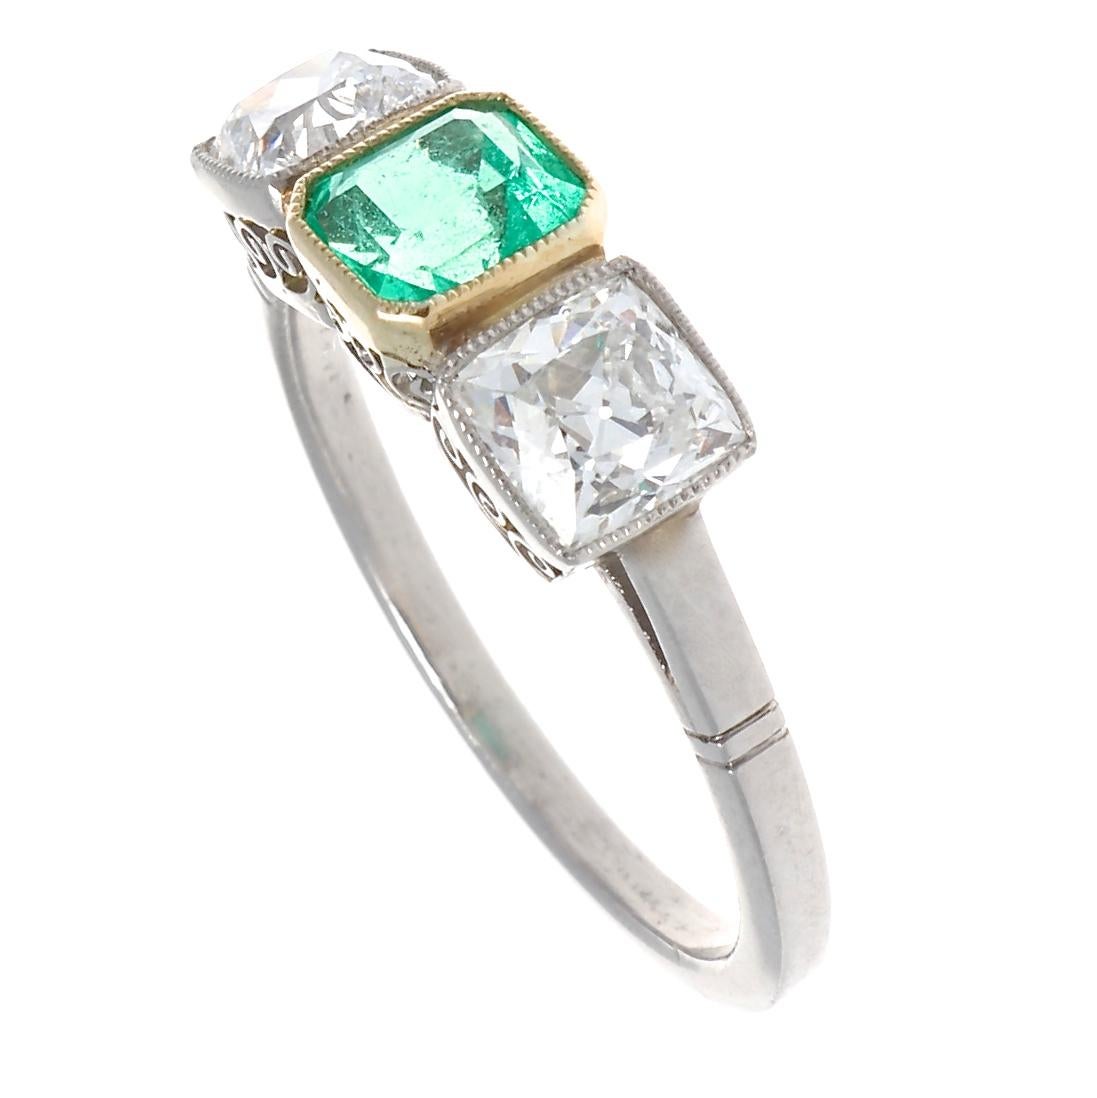 Sometimes a 3 stone ring comes along that delights beyond comprehension. At just over 0.50 carat, this green emerald cut treasure is accompanied by two of the sparkliest old European cut diamonds. A delicate mill grain bezel frames each stone. The